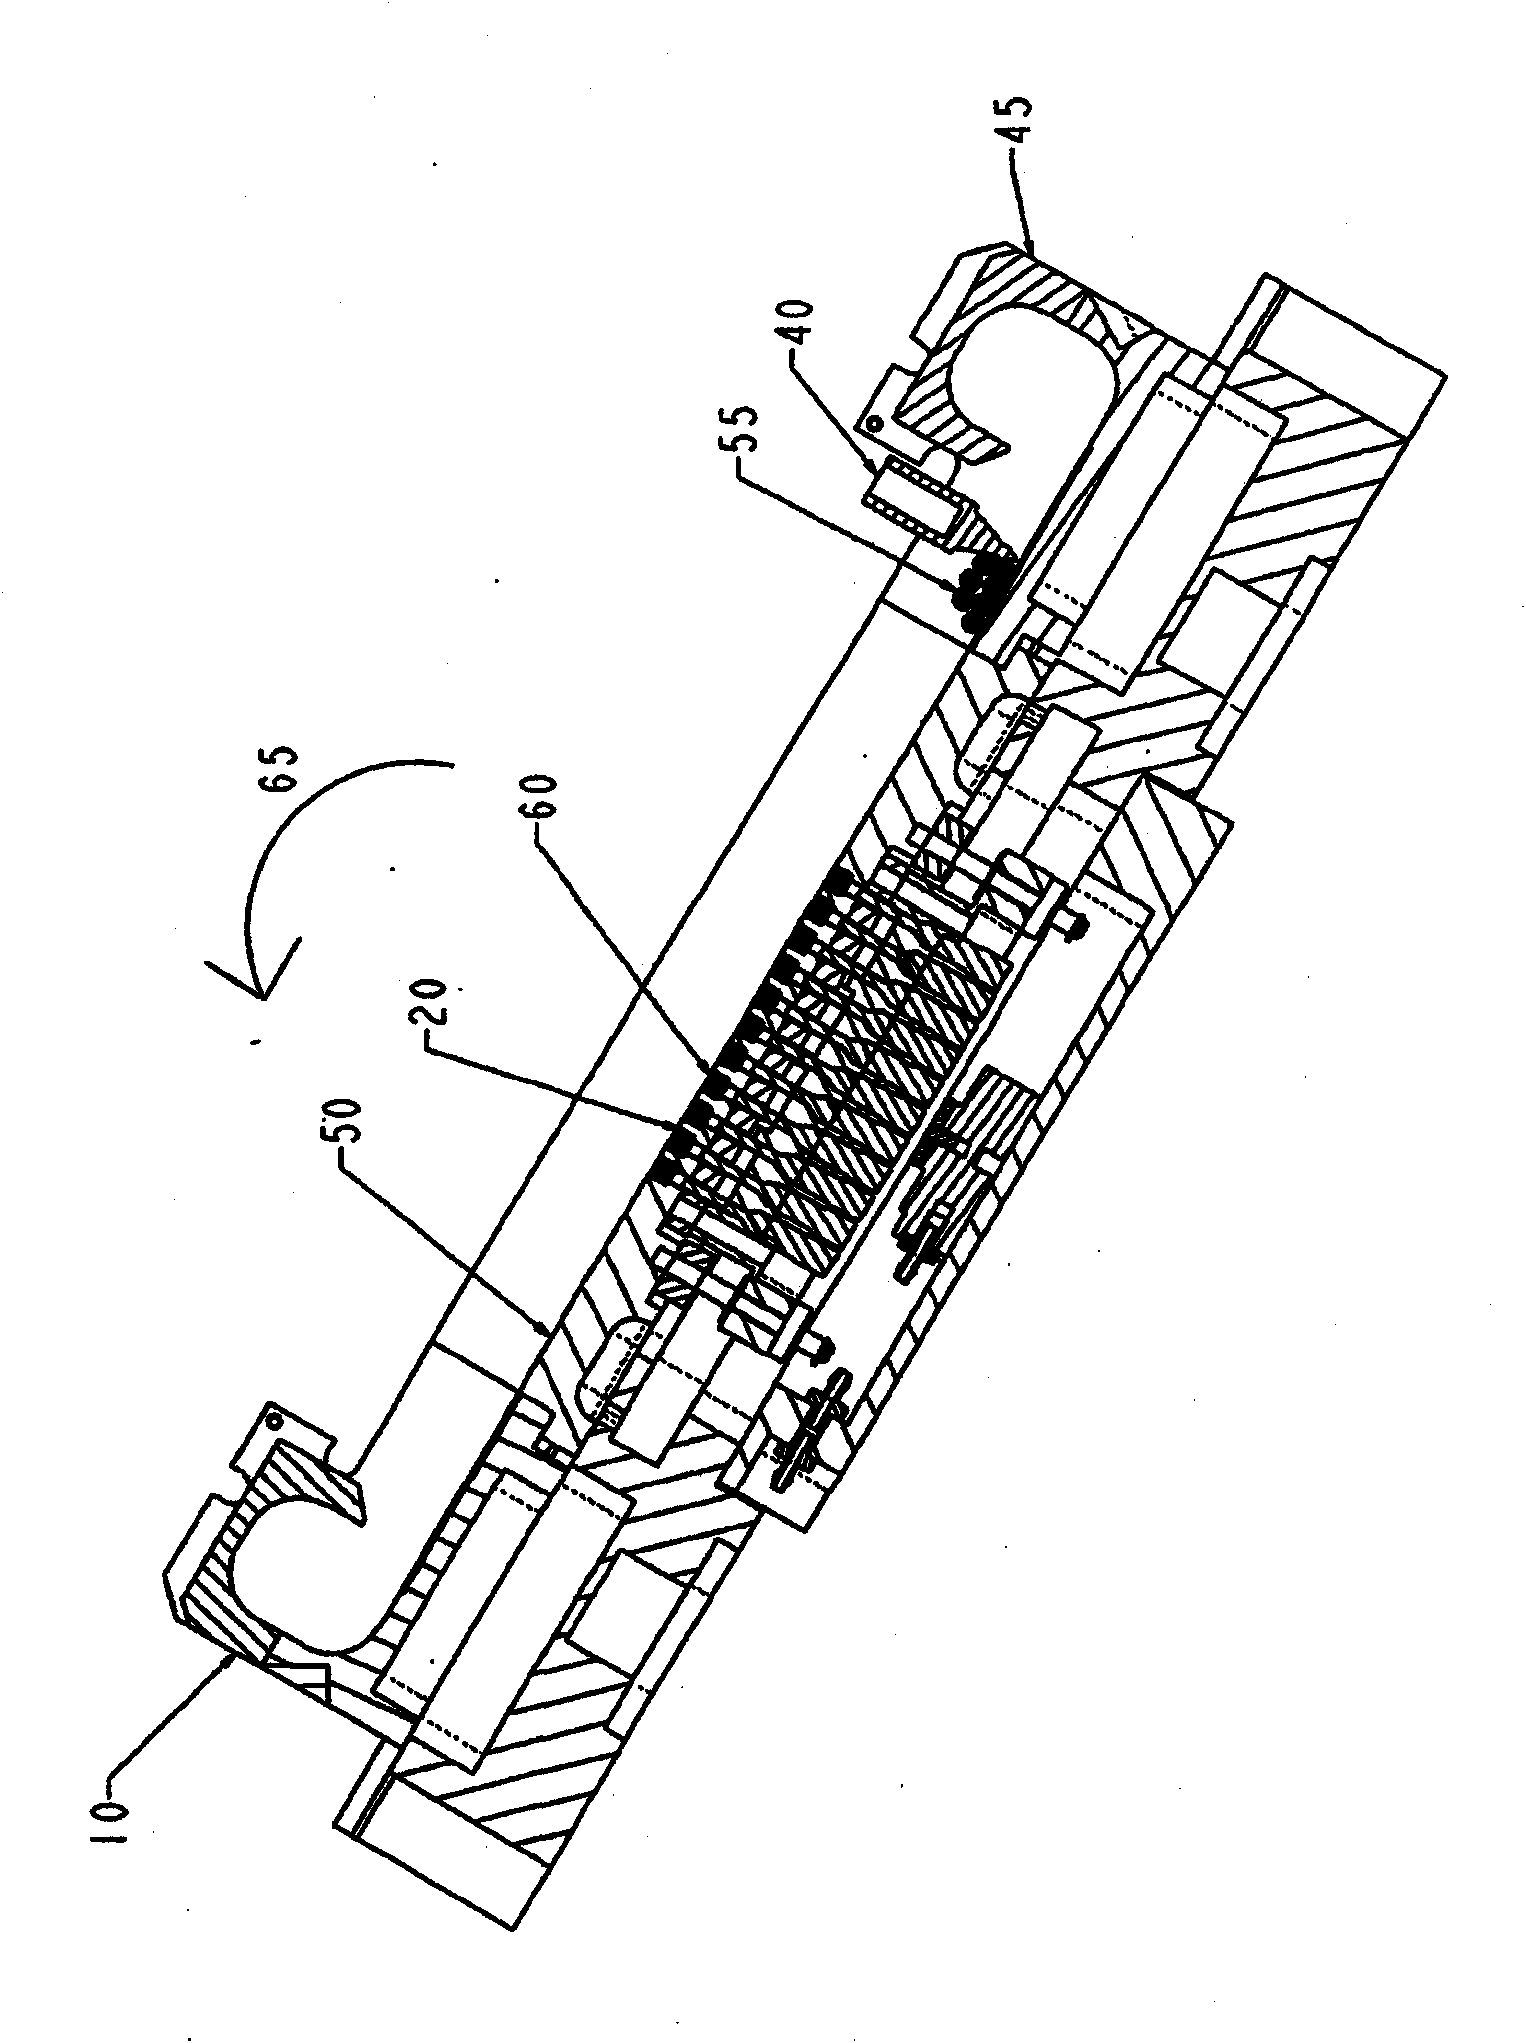 Method and apparatus for solder ball placement